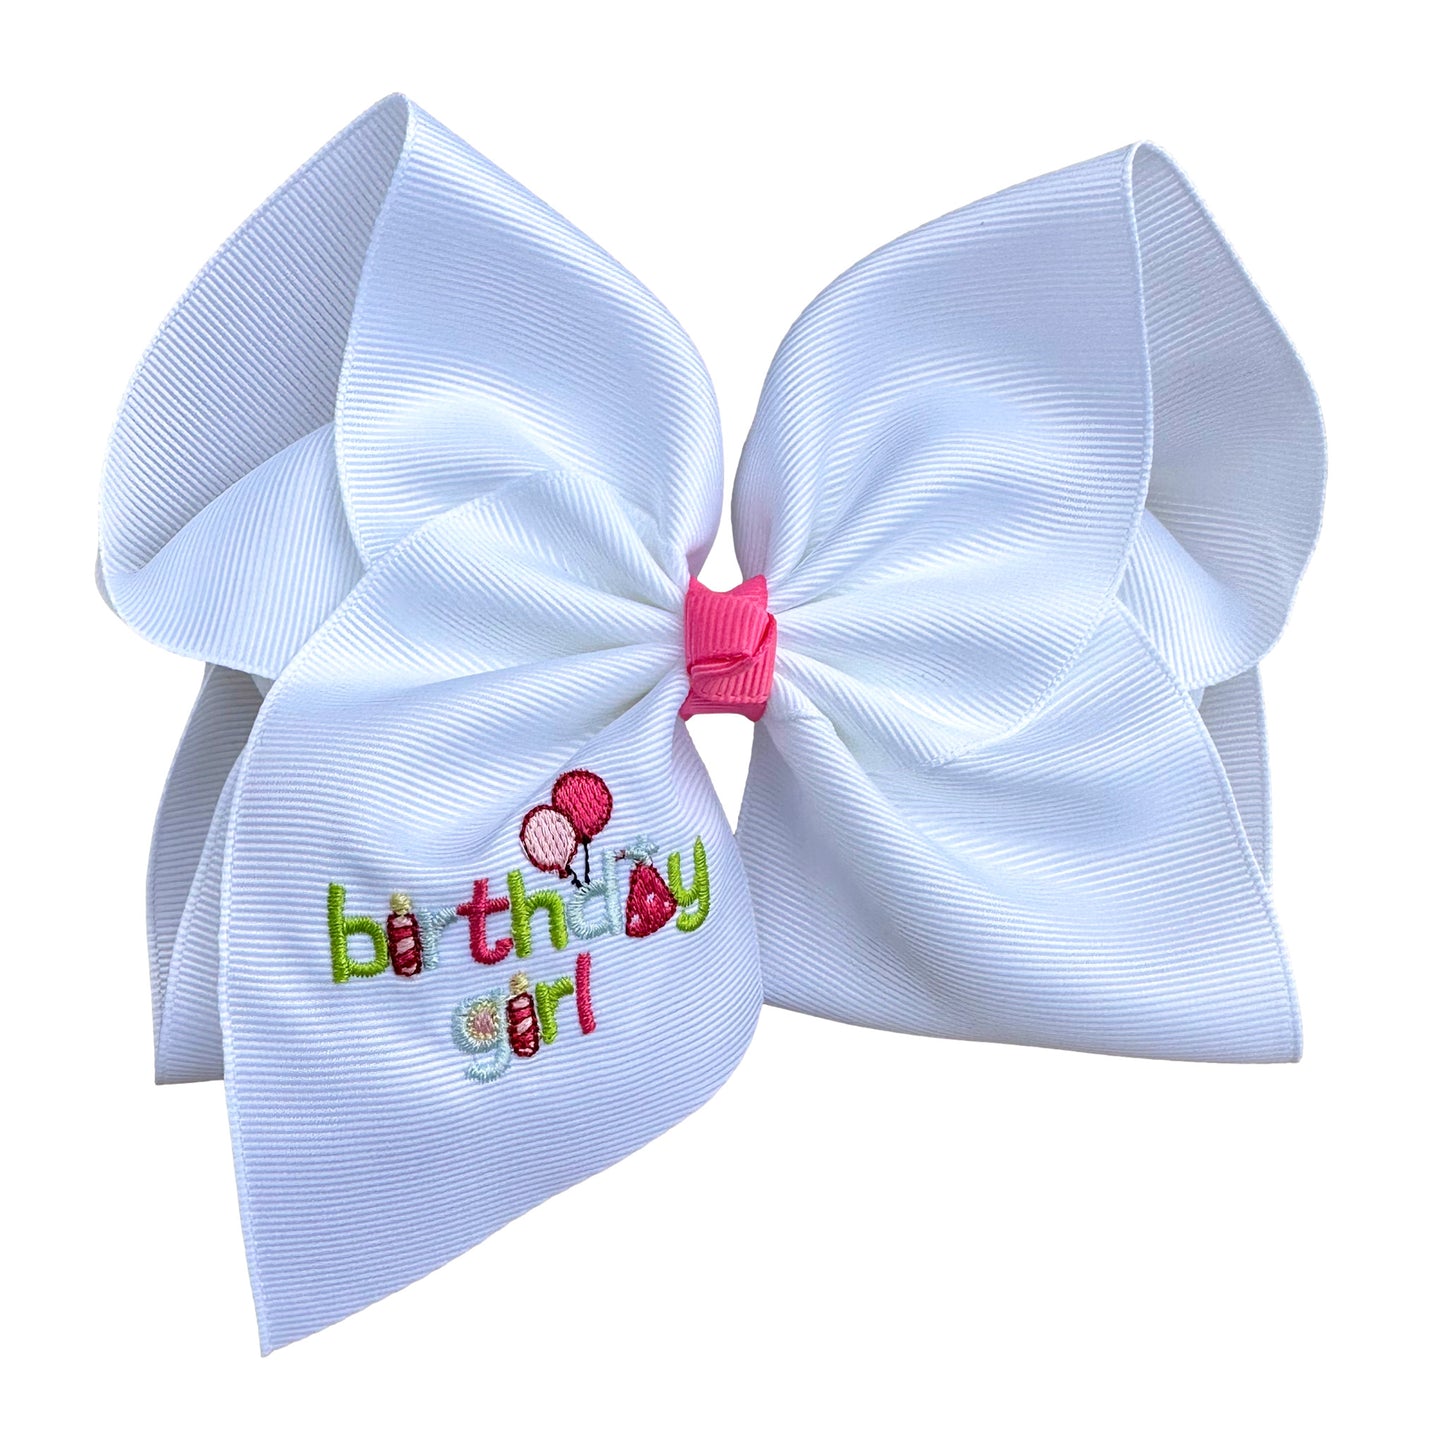 Birthday Girl Embroidered Bow